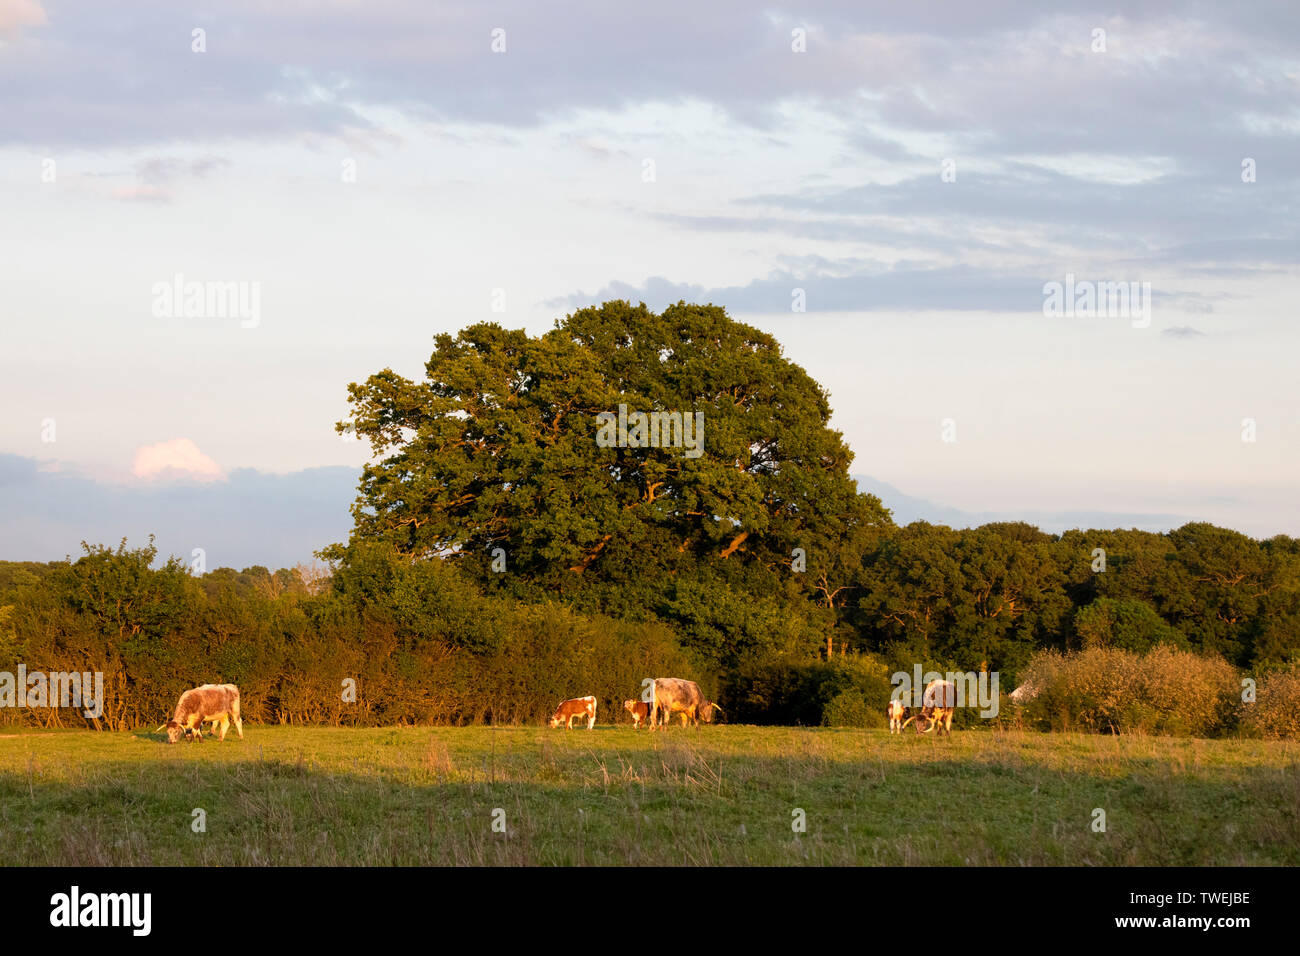 English Longhorn cattle grazing in early morning light Banque D'Images